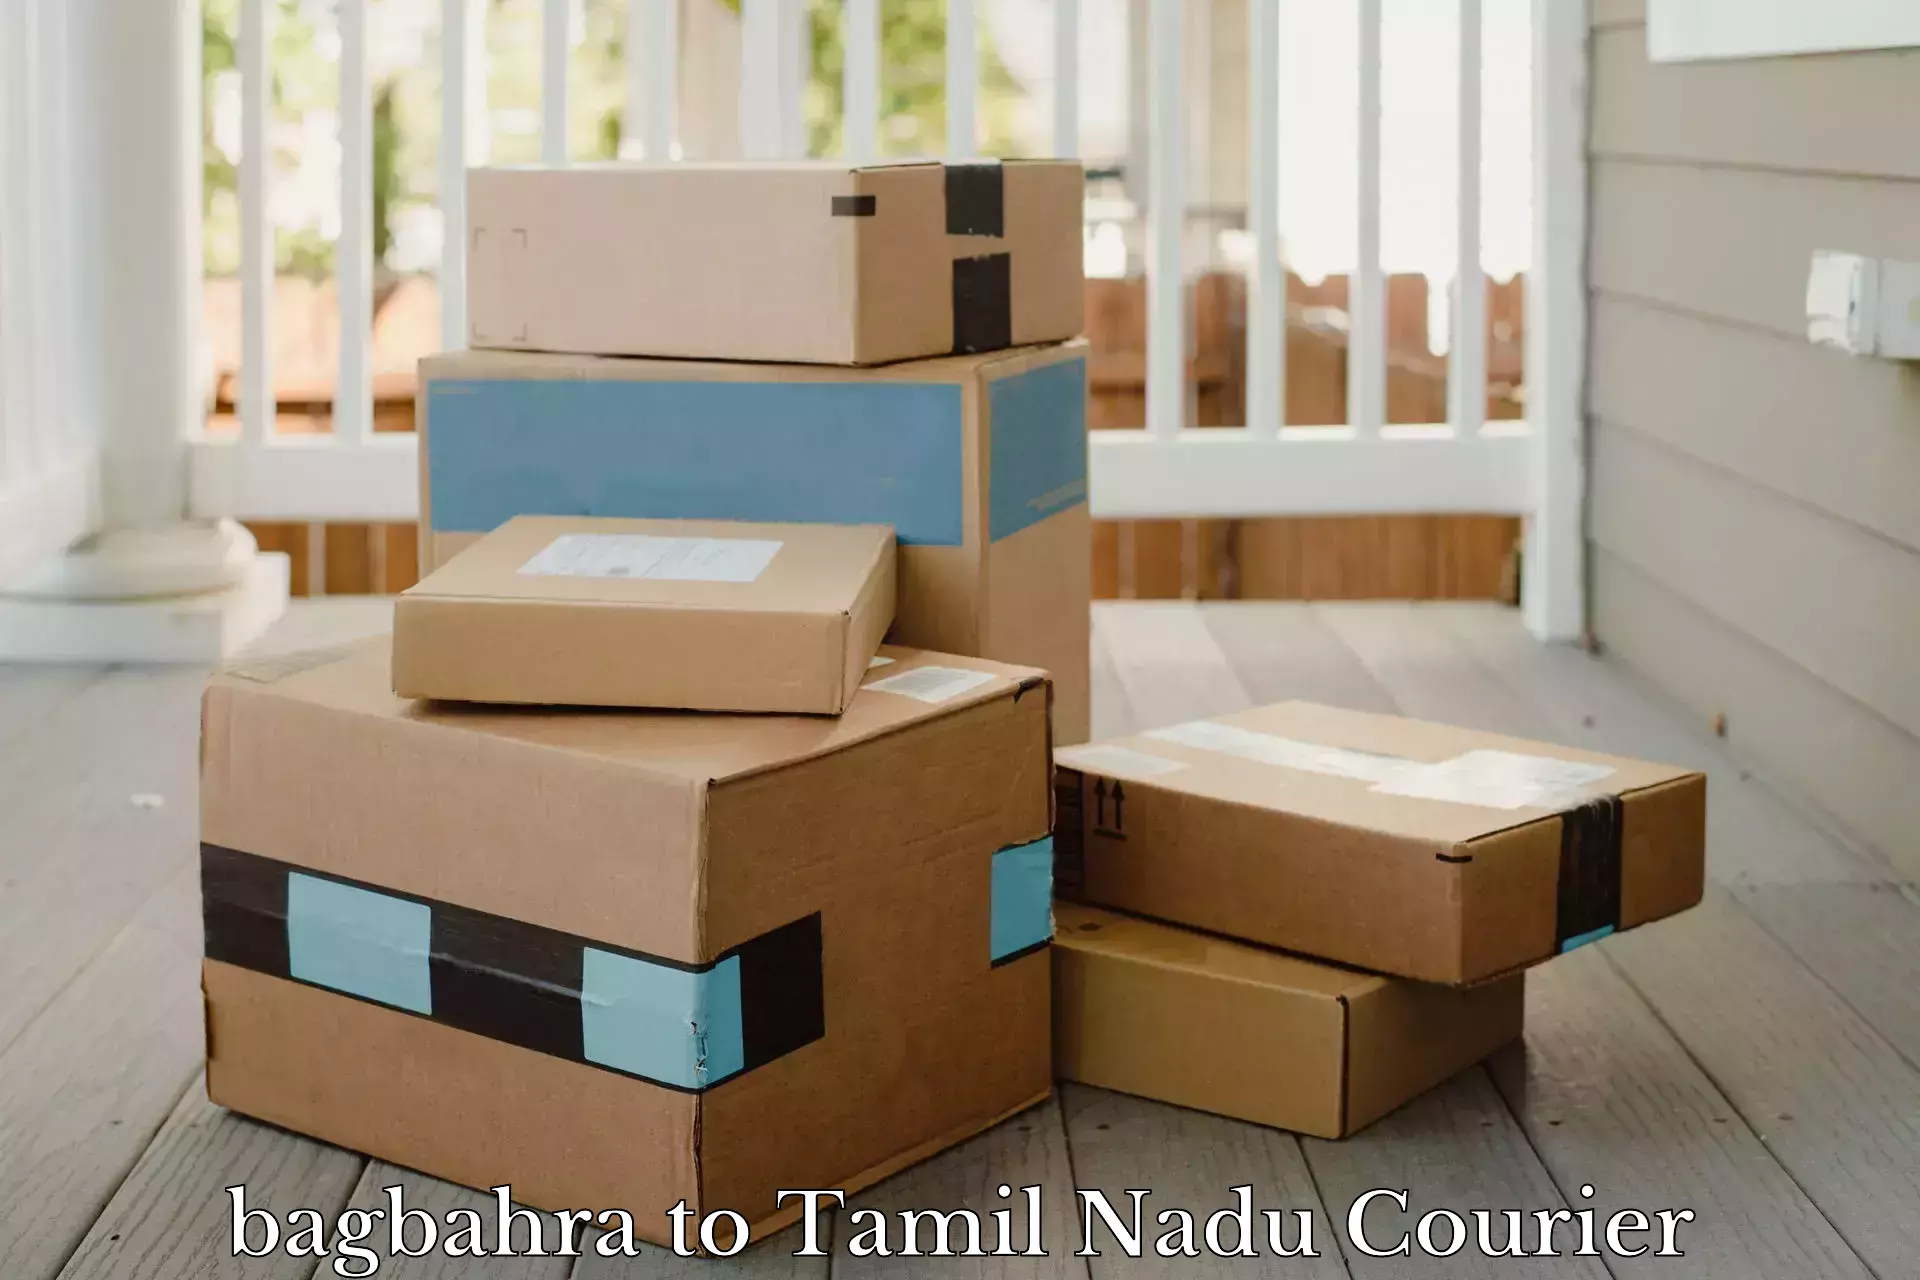 Special handling courier bagbahra to Kanchipuram